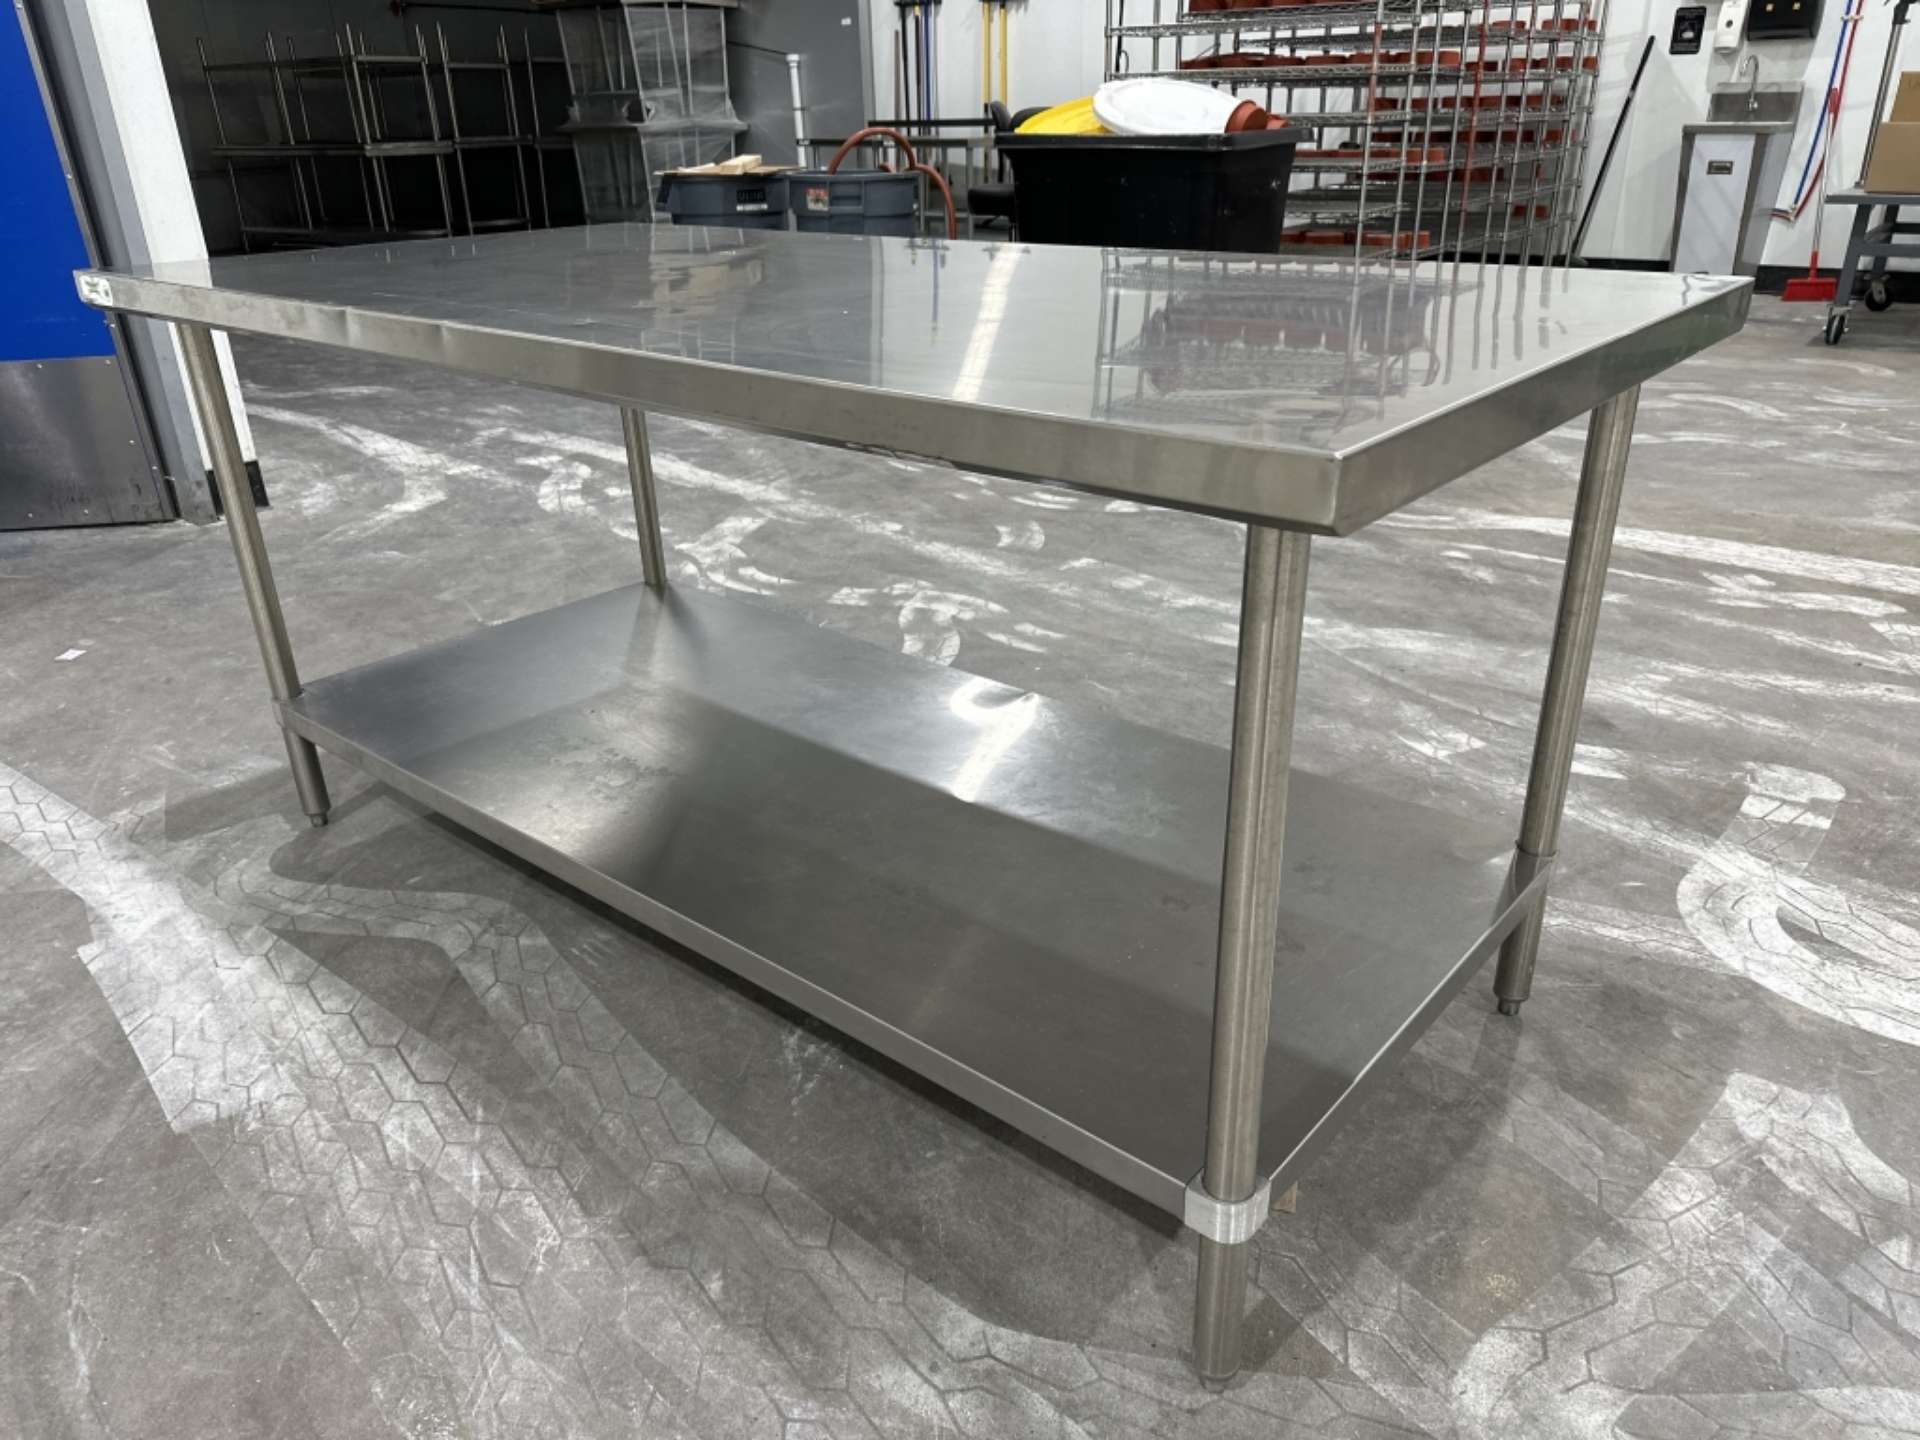 Stainless Steel Prep Table - 6ft x 3ft - Image 2 of 2